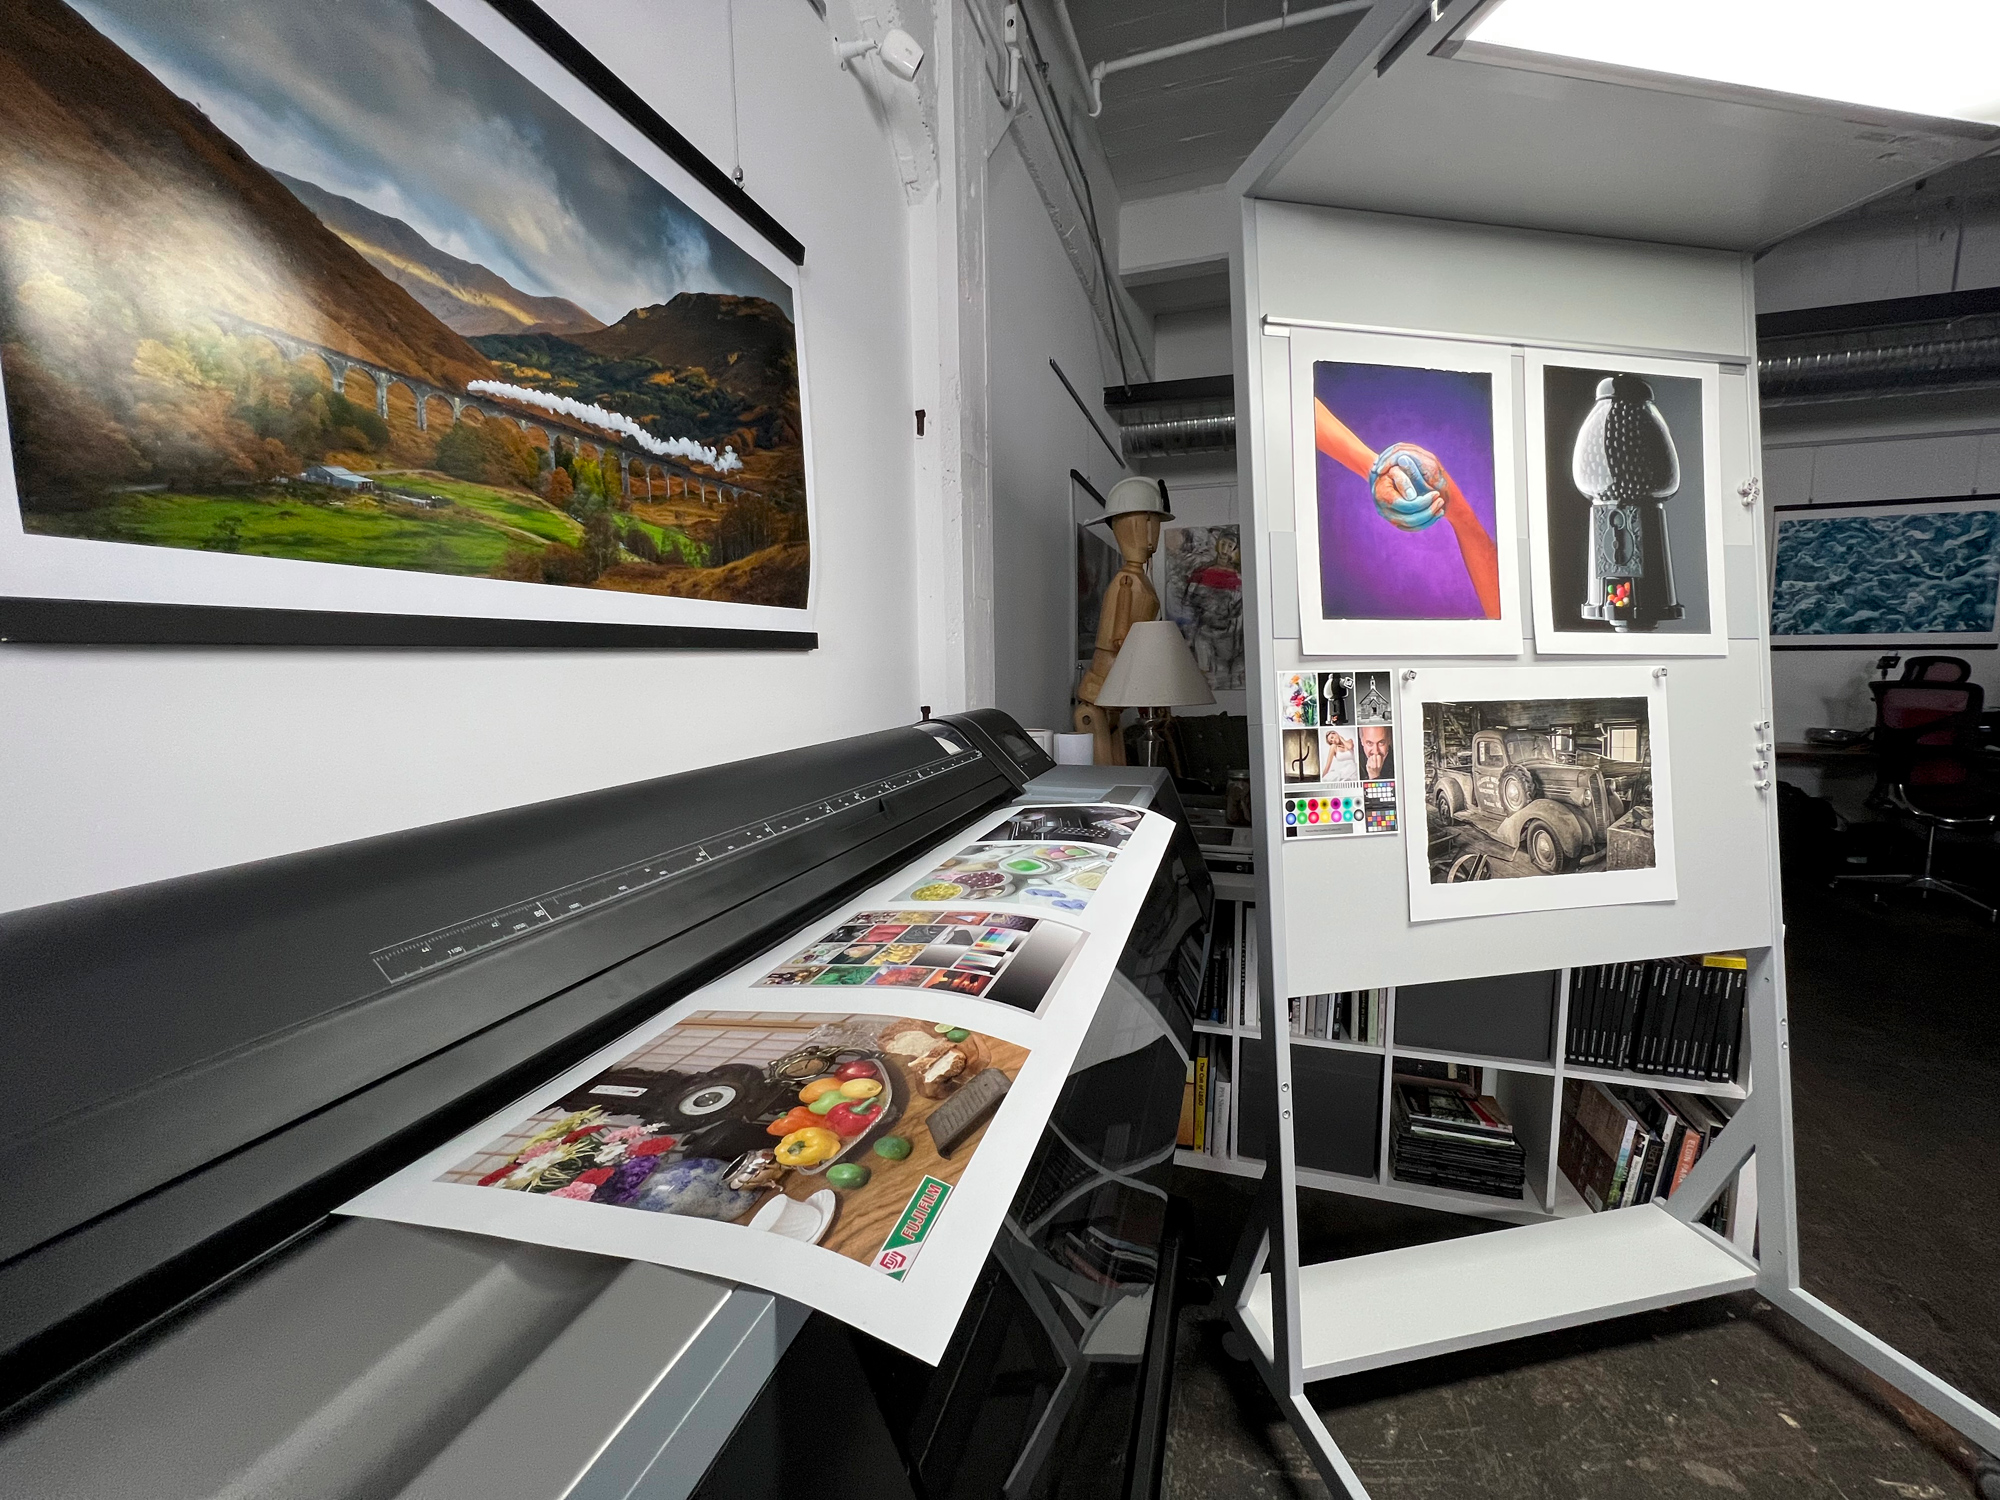 The Epson 9570 and GTI Print inspection station